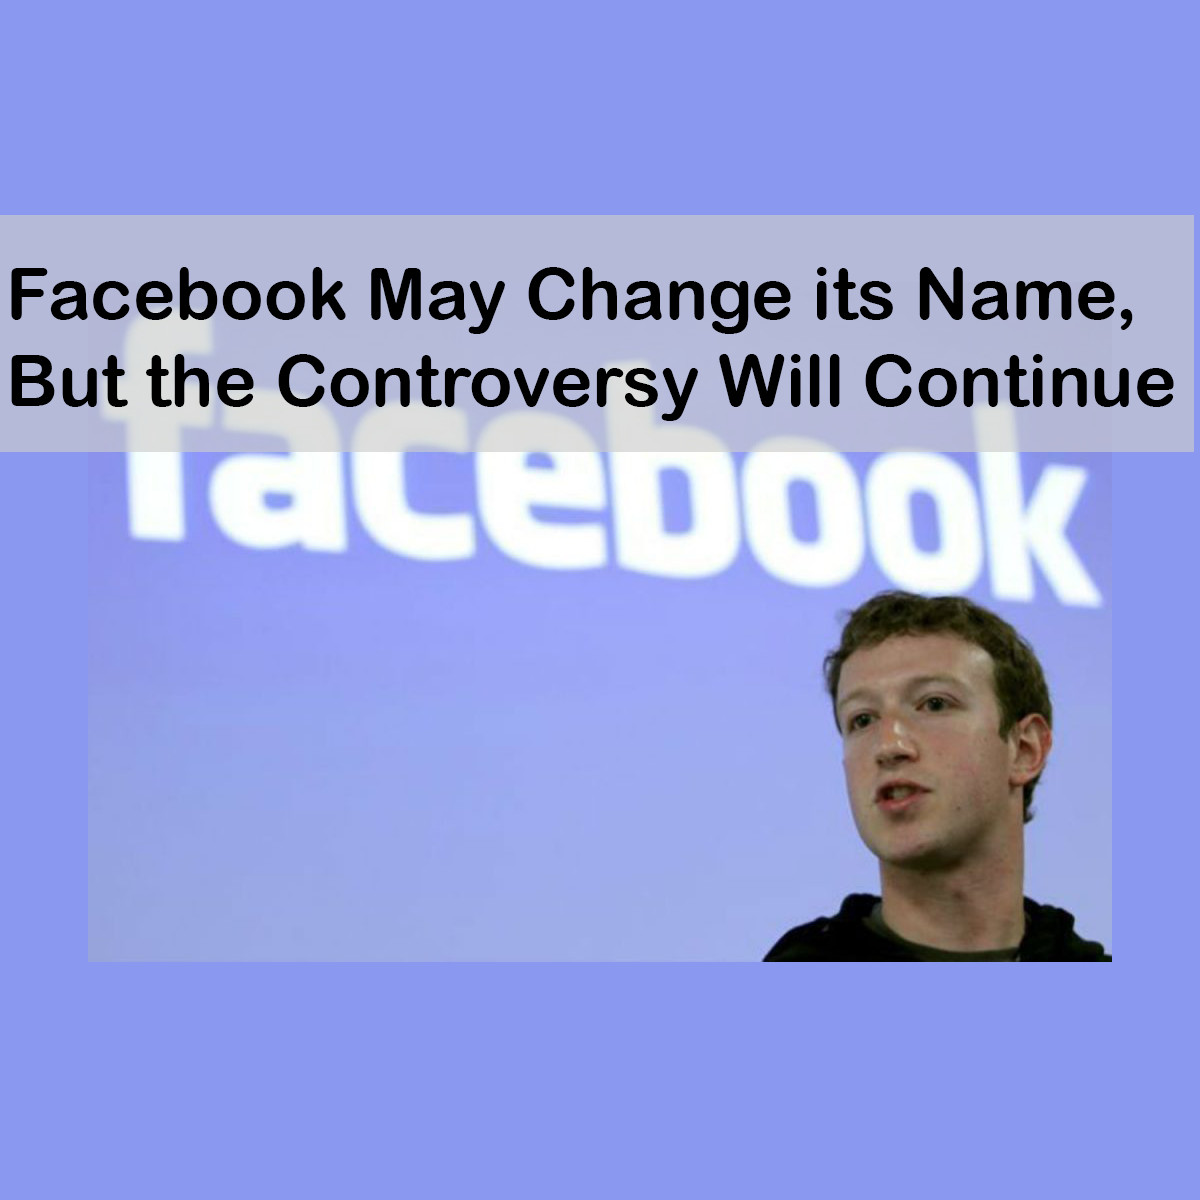 Facebook May Change its Name, But the Controversy Will Continue